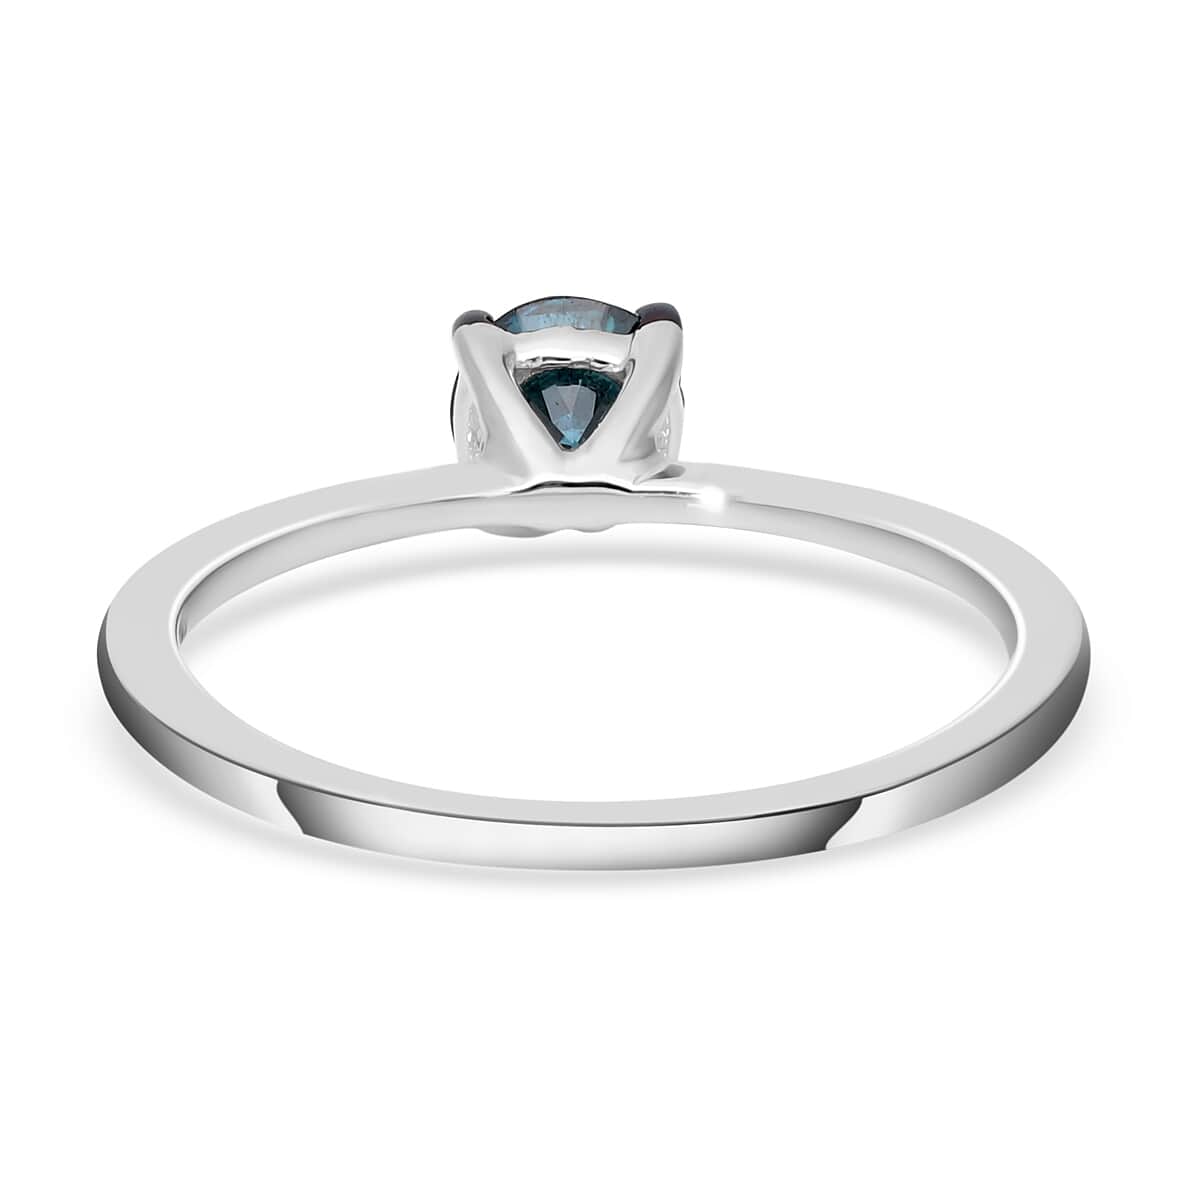 Blue Diamond Solitaire Ring | Platinum Over Sterling Silver Ring | Blue Diamond Ring | Promise Ring | Rings For Her 0.50 ctw (Size 8.0) image number 4